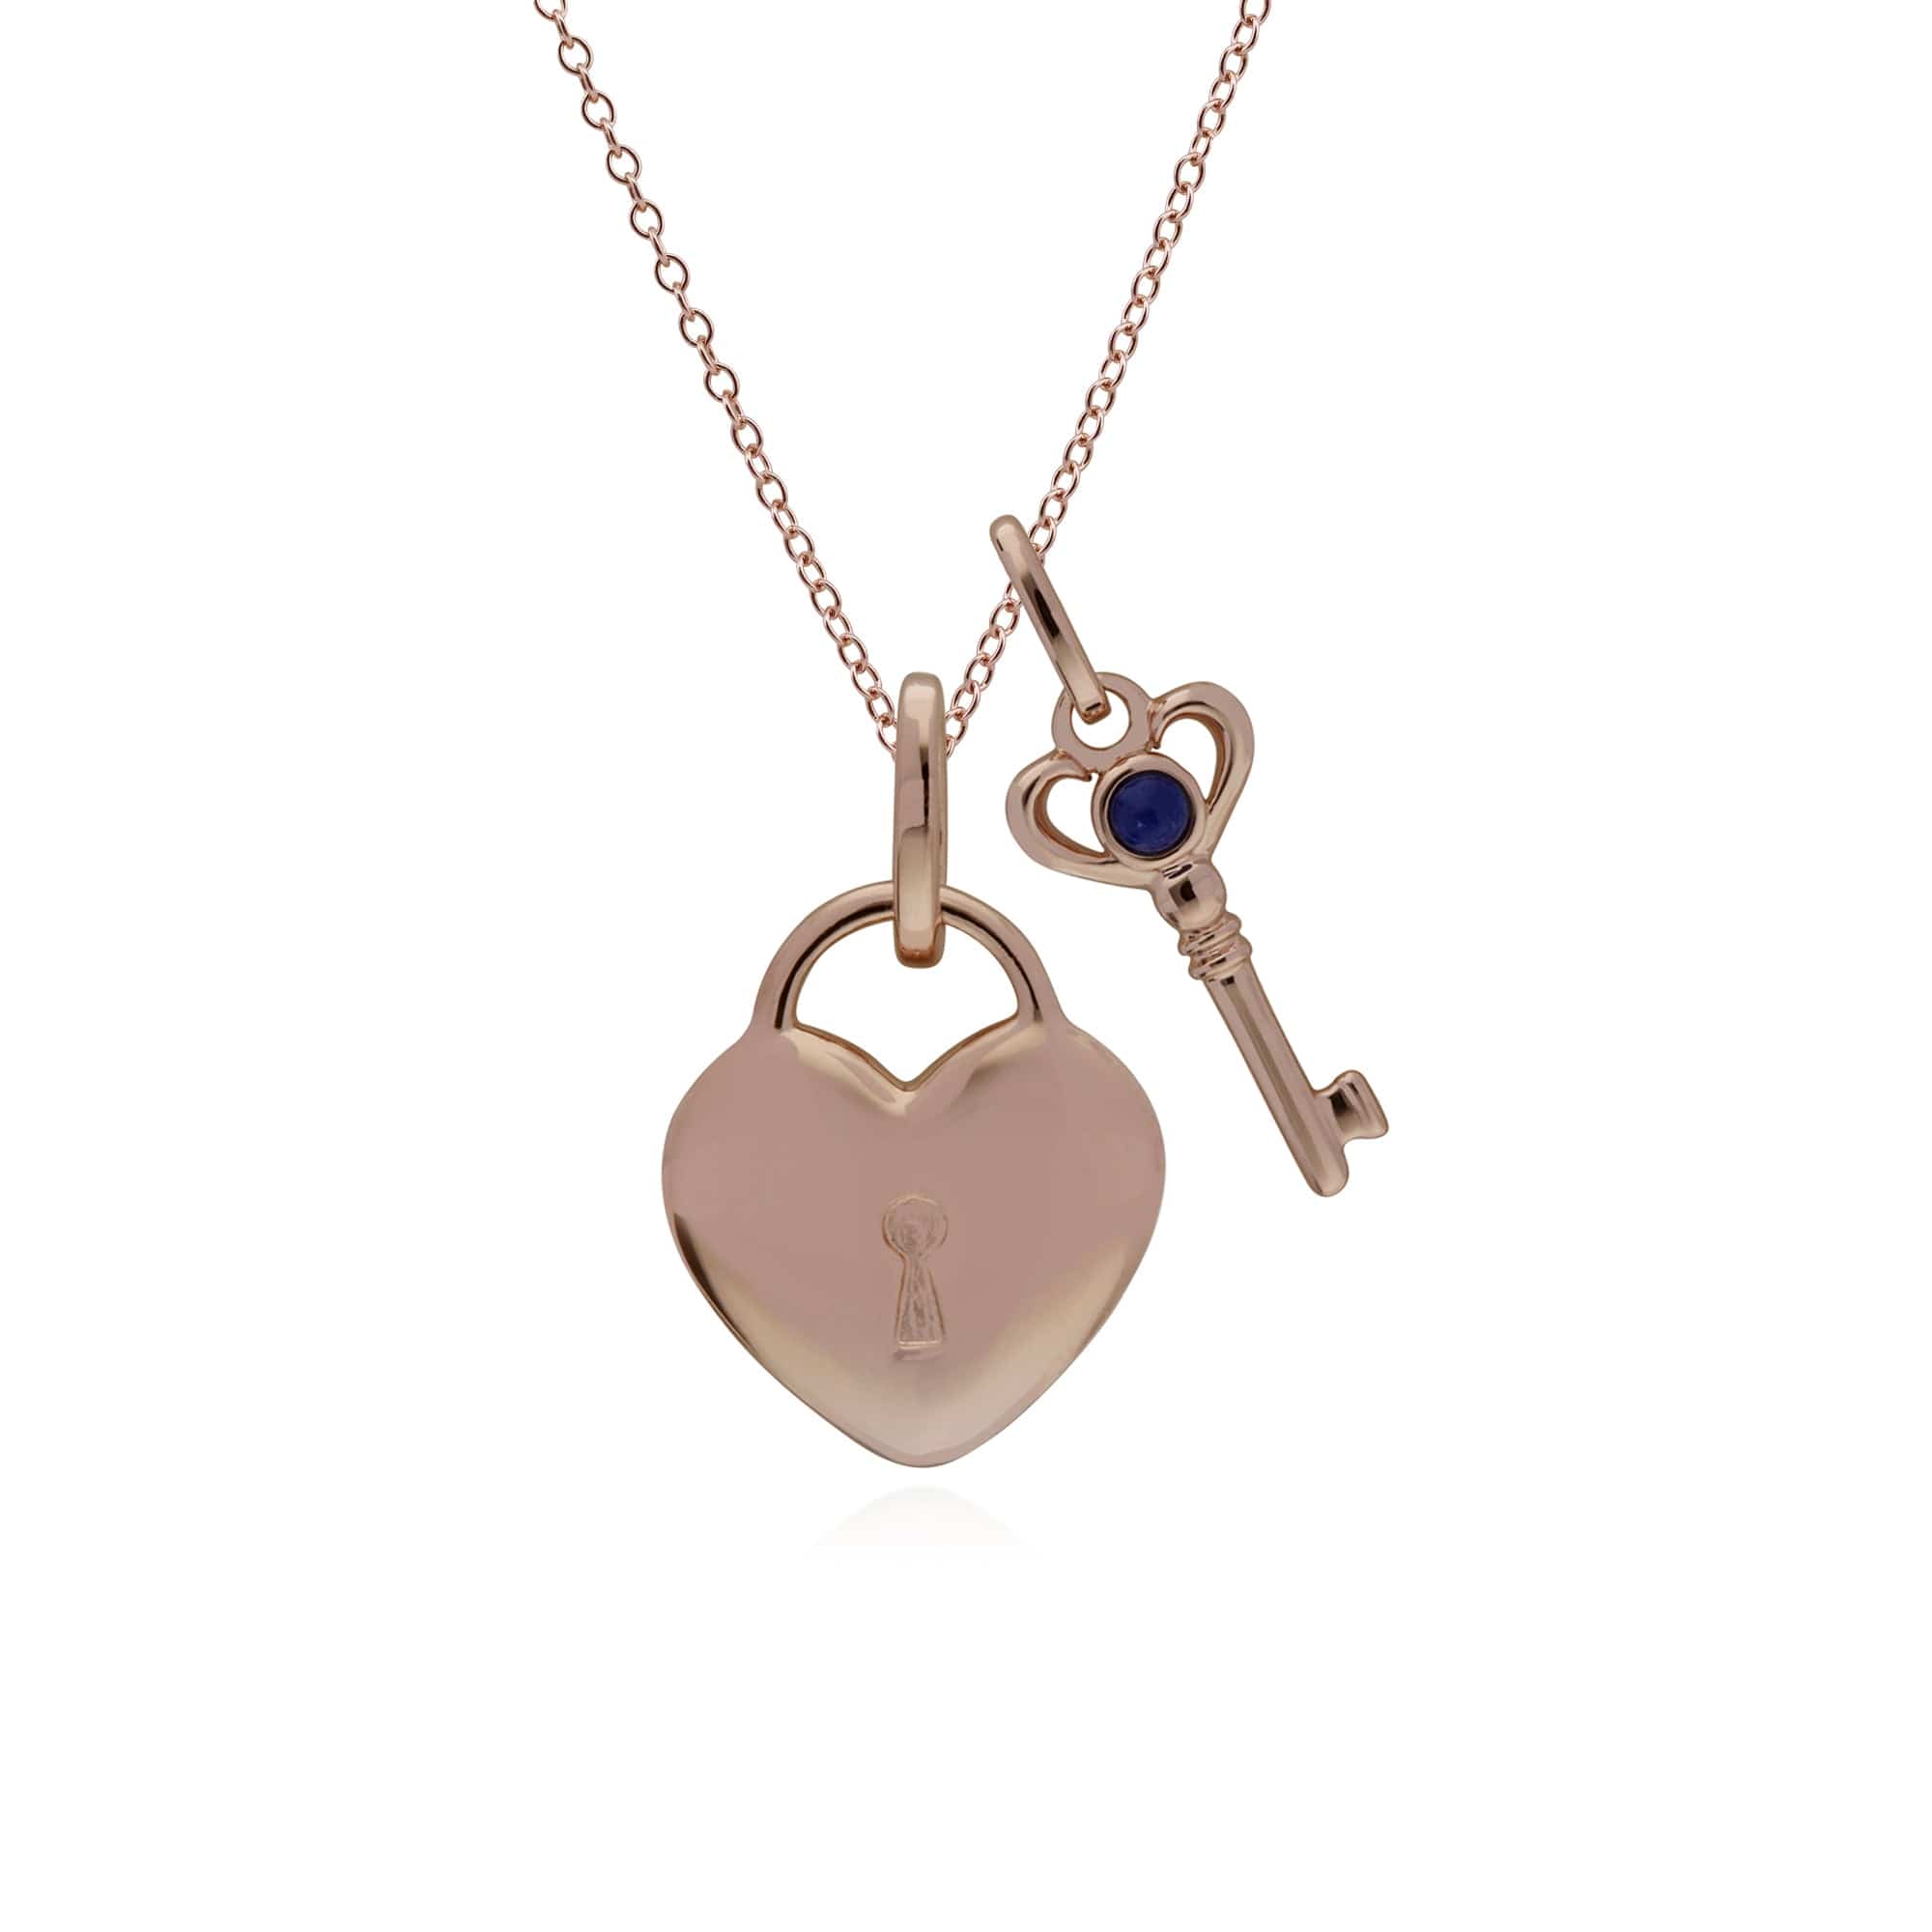 270P027401925-270P026901925 Classic Heart Lock Pendant & Lapis Lazuli Key Charm in Rose Gold Plated 925 Sterling Silver 1